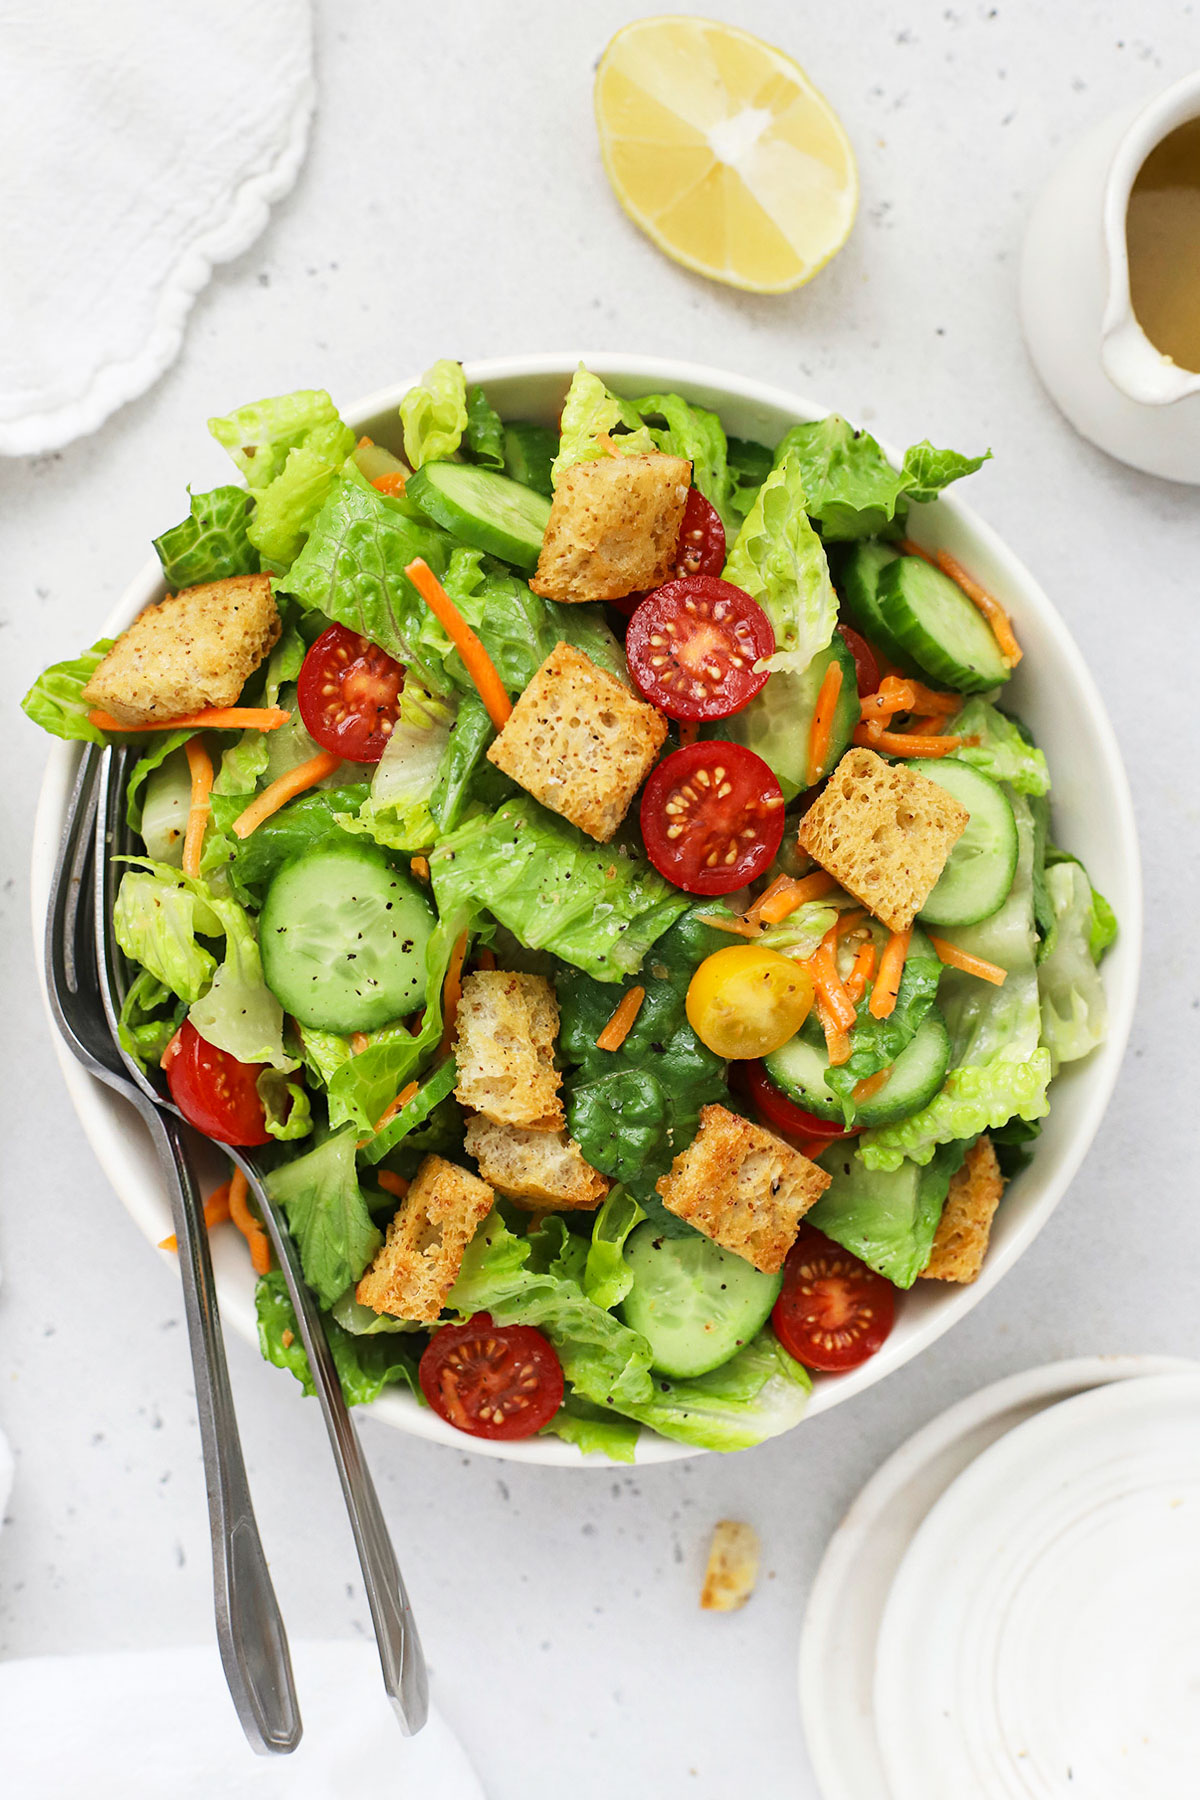 simple green salad with gluten-free croutons